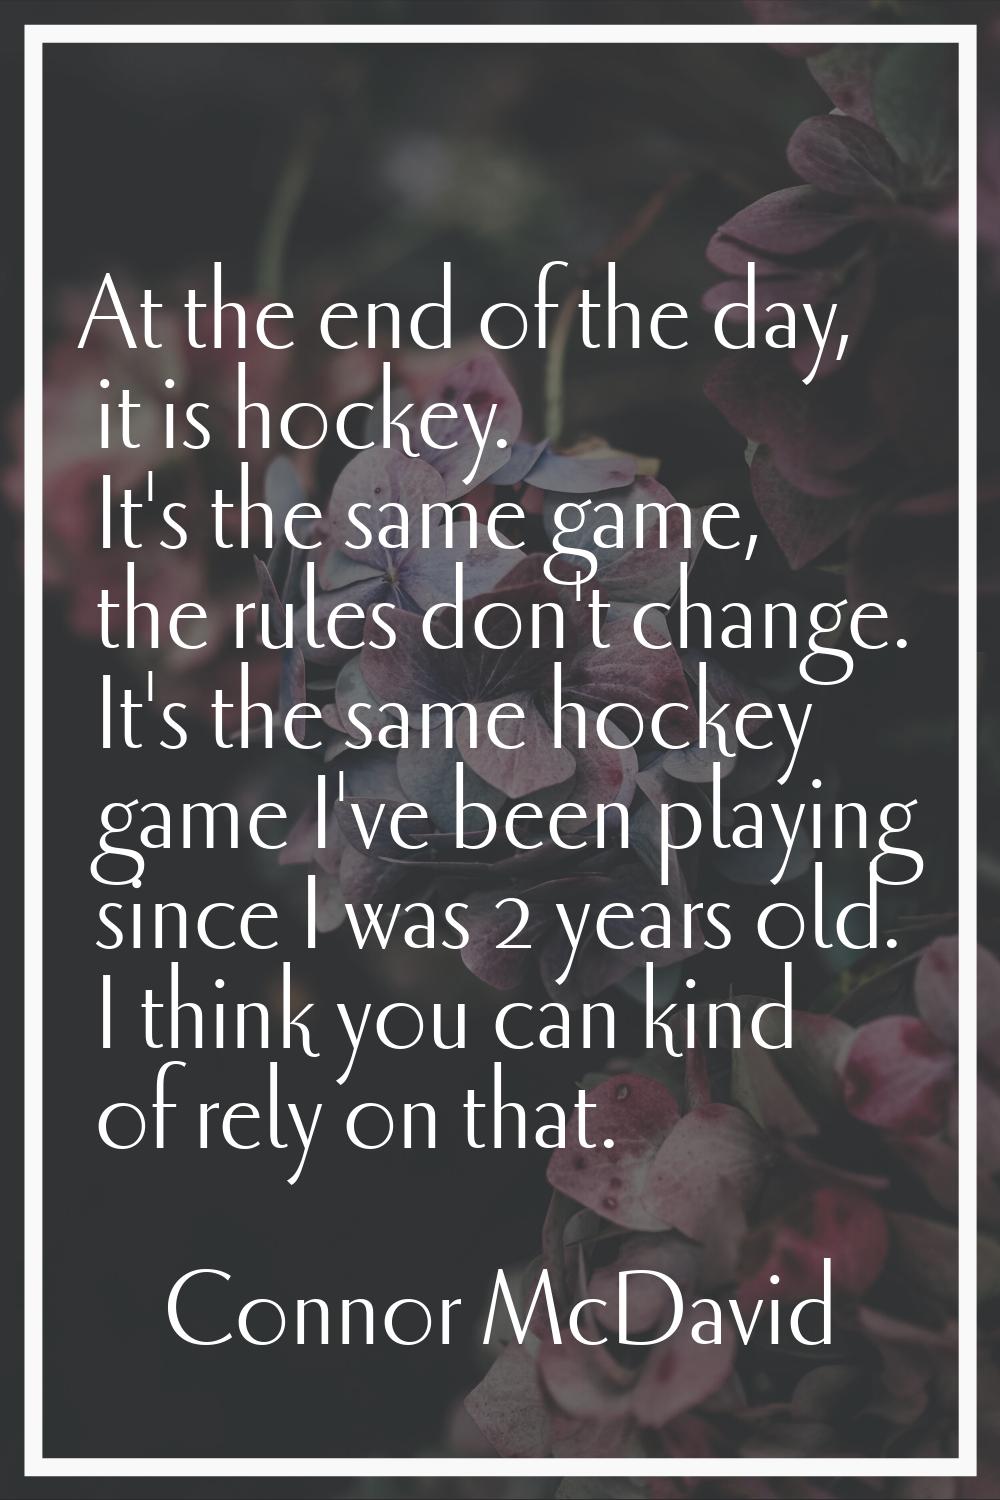 At the end of the day, it is hockey. It's the same game, the rules don't change. It's the same hock